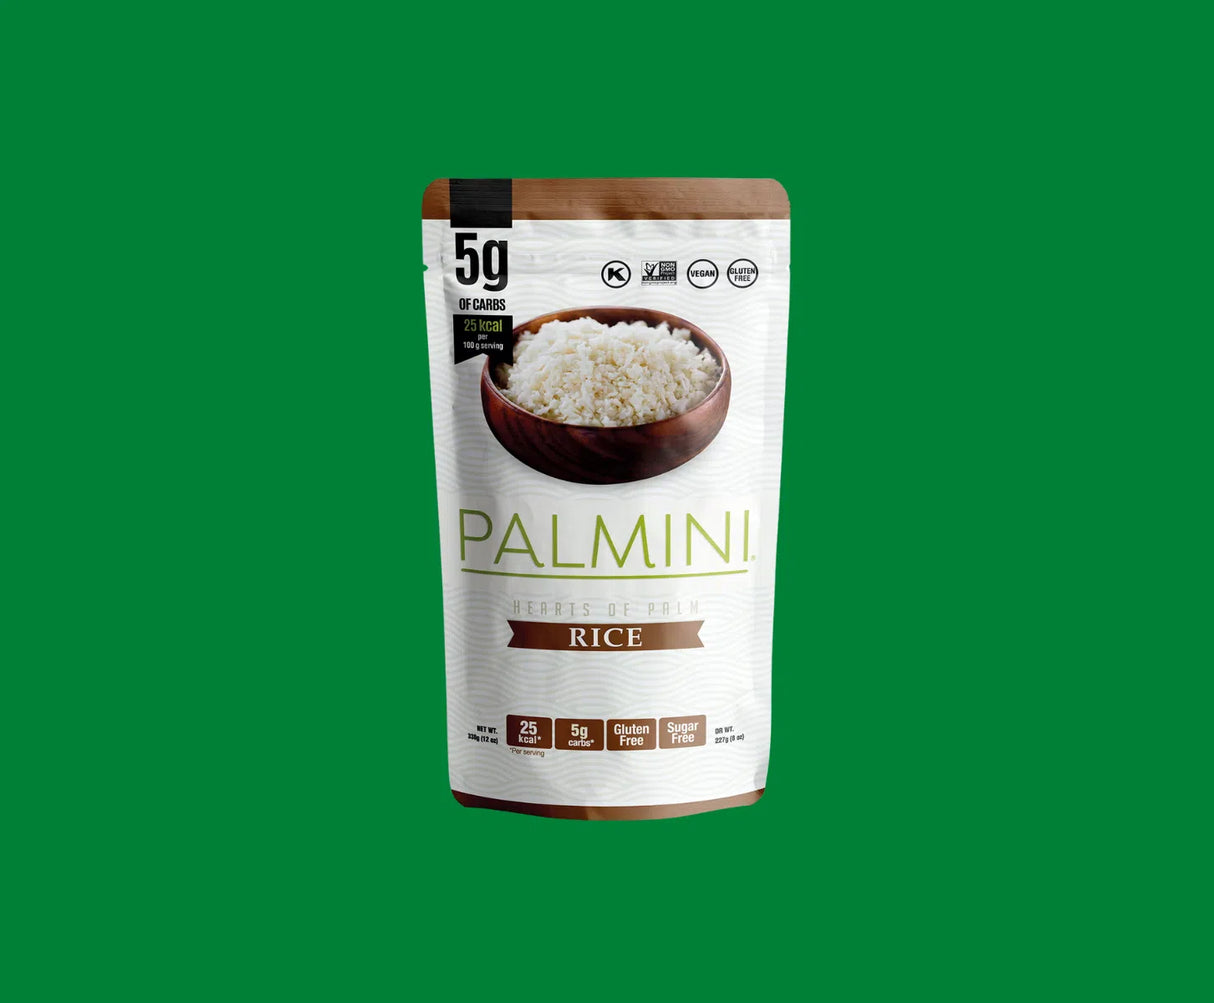 Palmini Keto & Low Carb Rice 338g Pouch